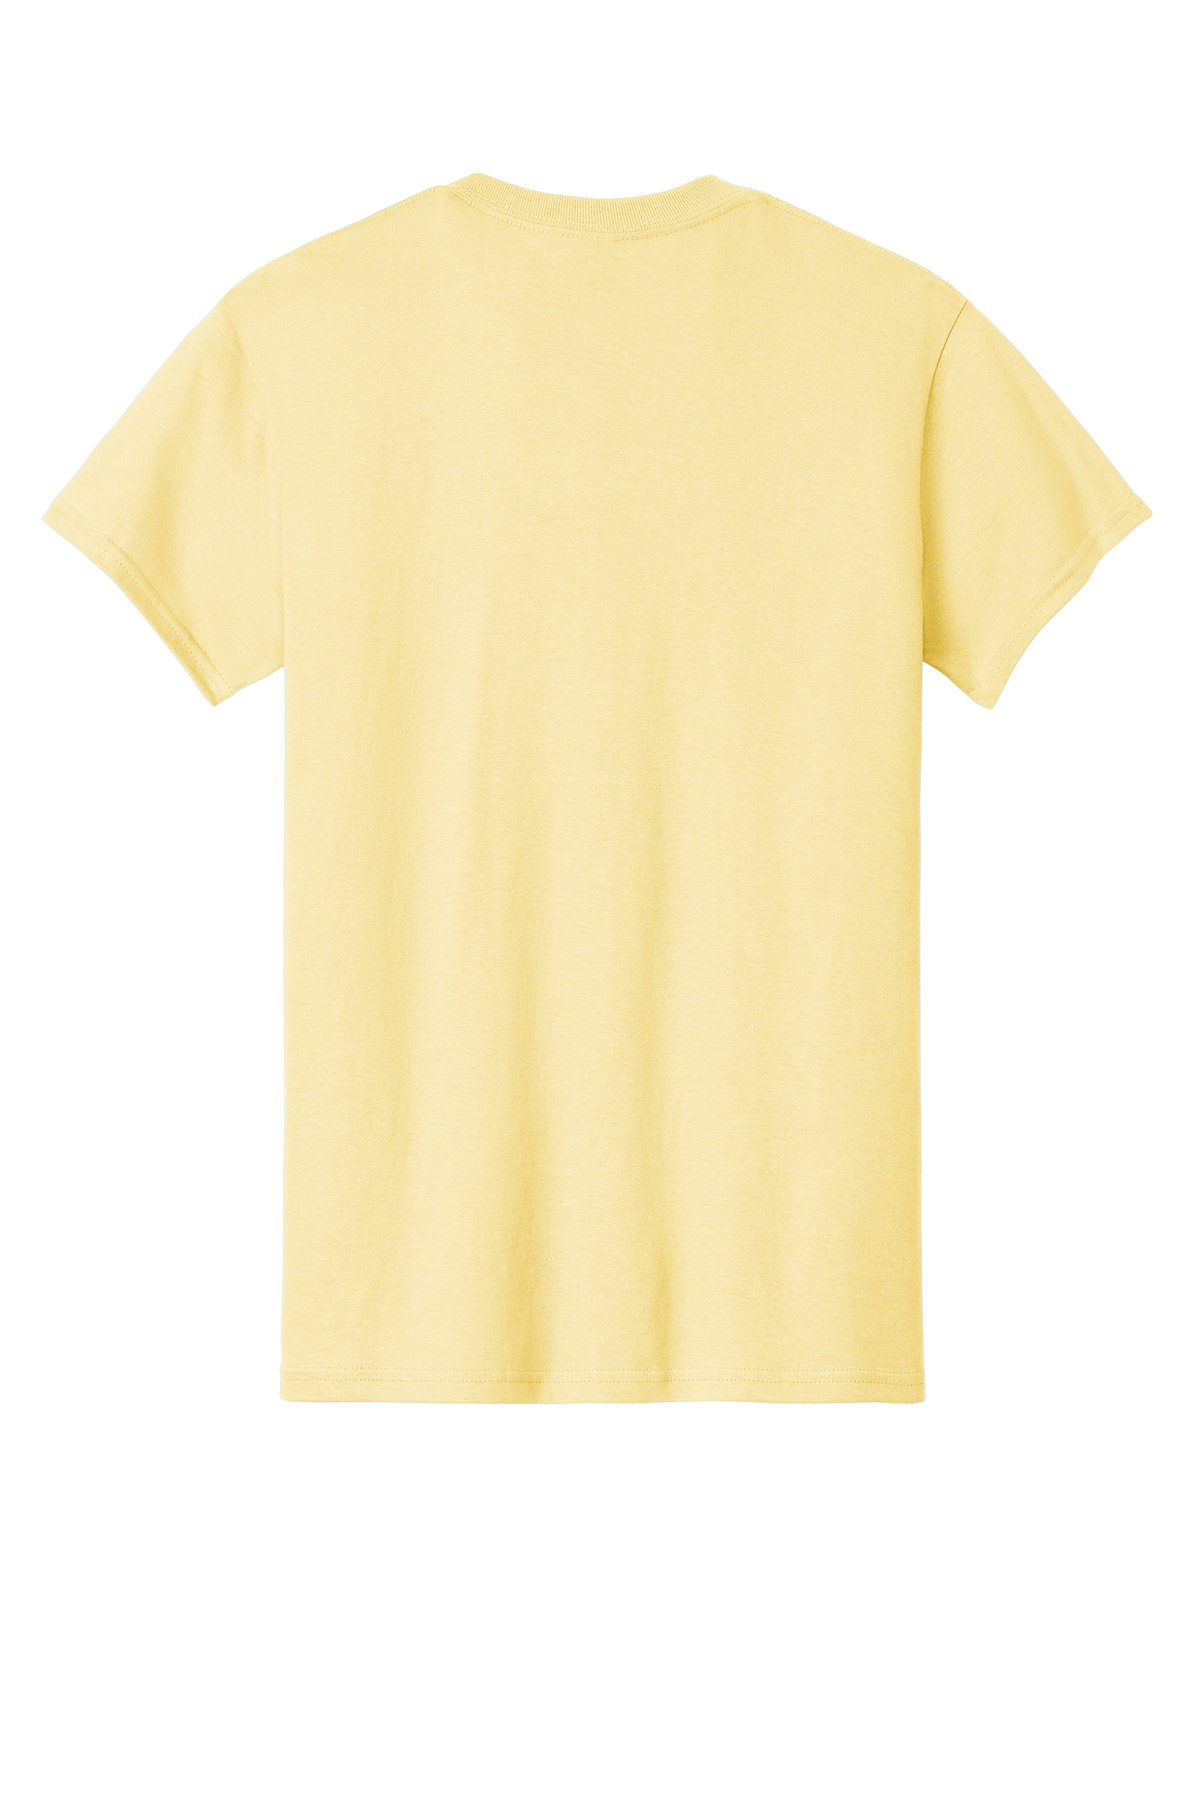 Nike MLB Boston Red Sox S/S Essential Cotton Tee Yellow